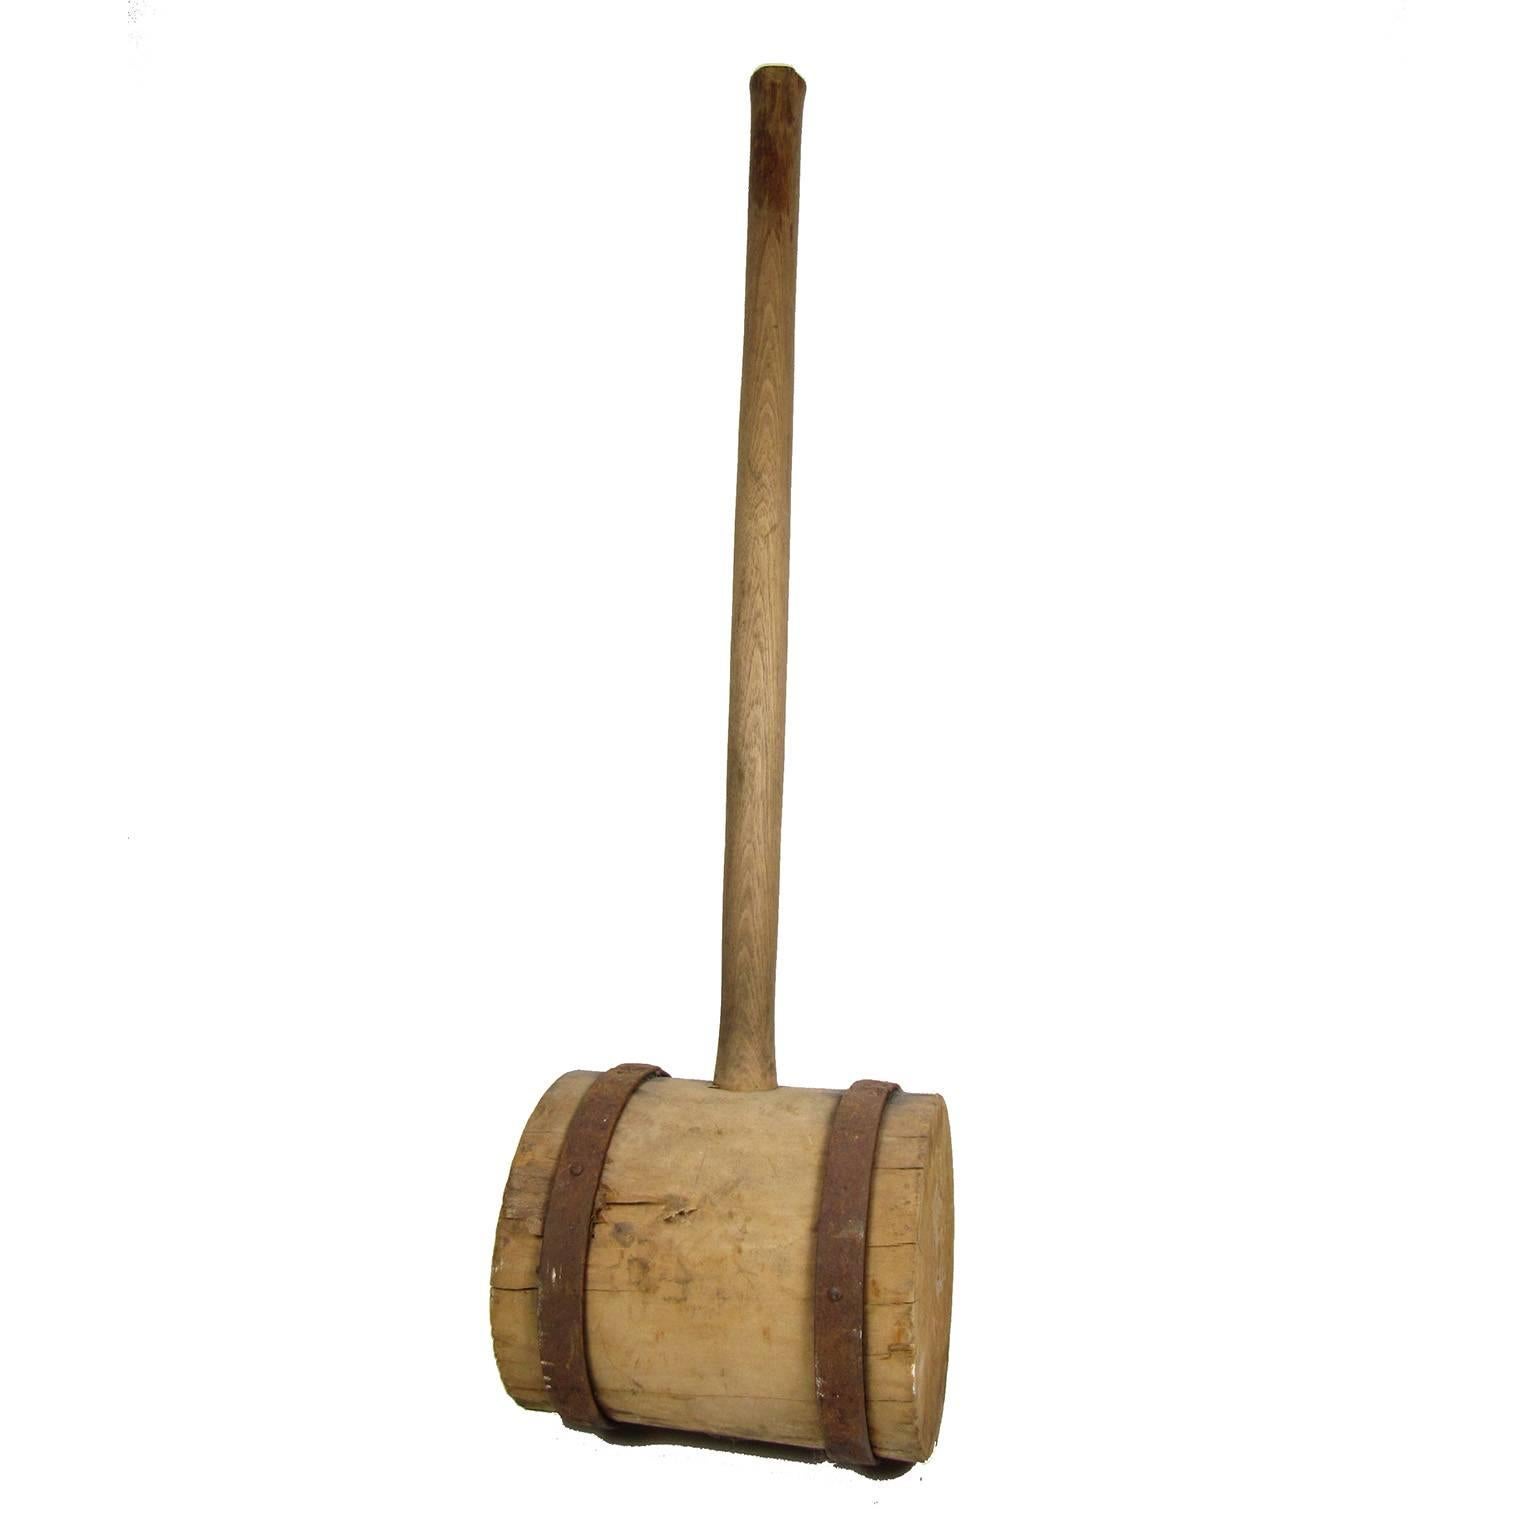 Large antique iron banded wood carnival strongman's mallet. Measures: Length 35 3/4 inches, height 9 1/2 inches, diameter 8 inches. Terrific object.